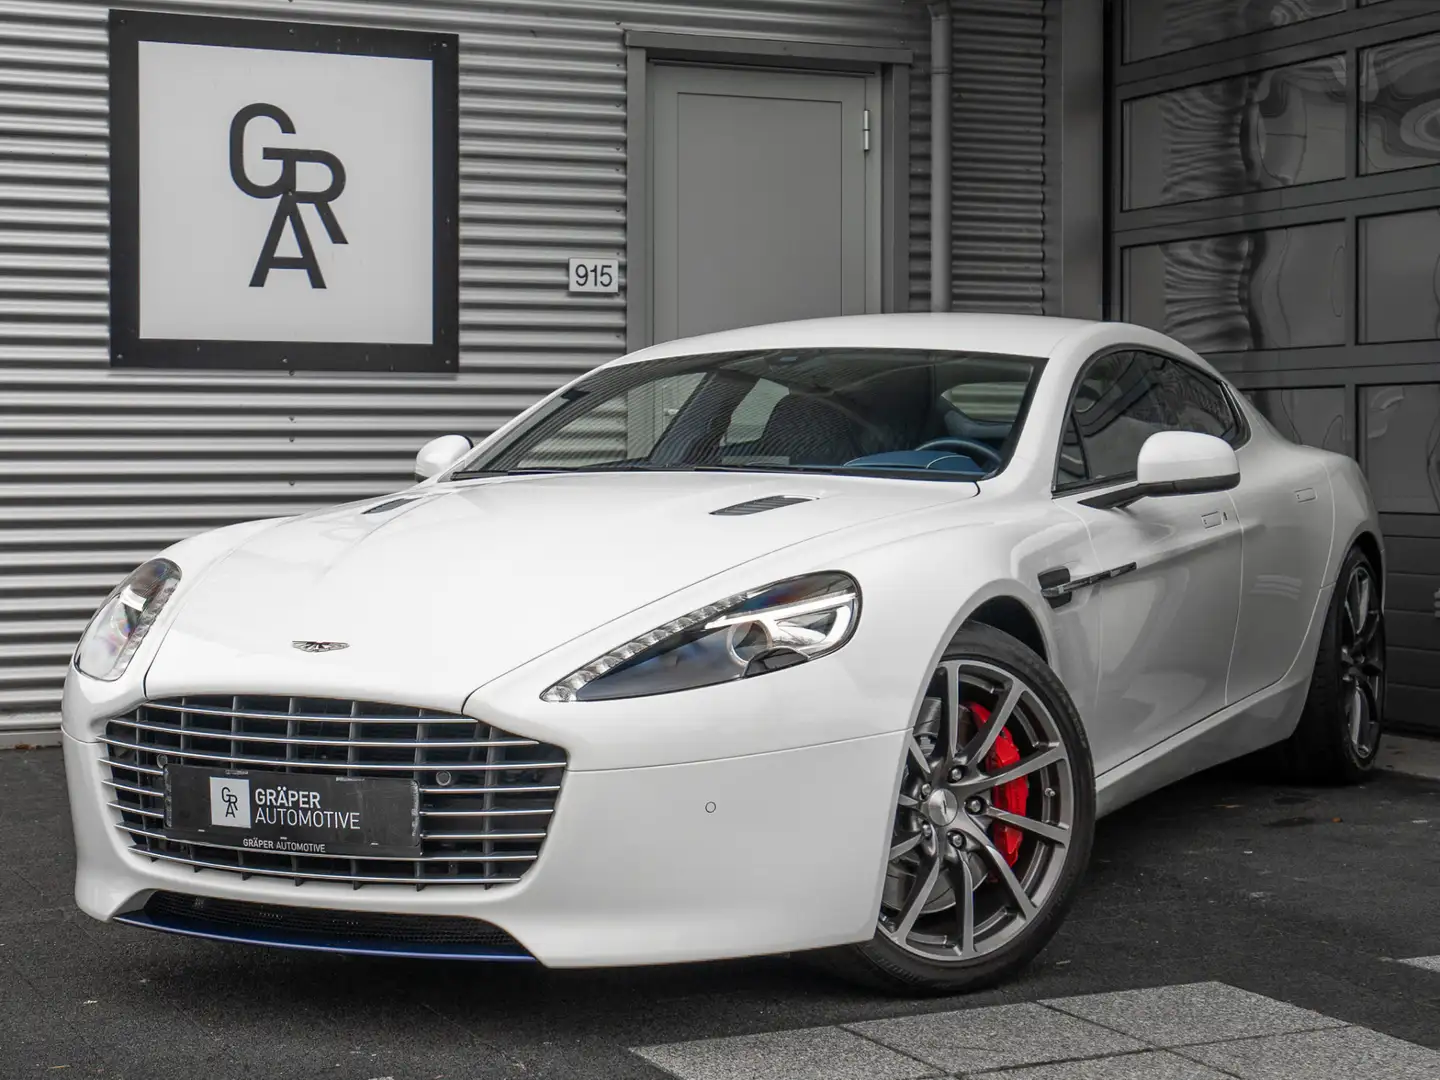 Aston Martin Rapide S 6.0 V12 ‘Britain is Great’ Edition by Q 1/8 Beyaz - 1